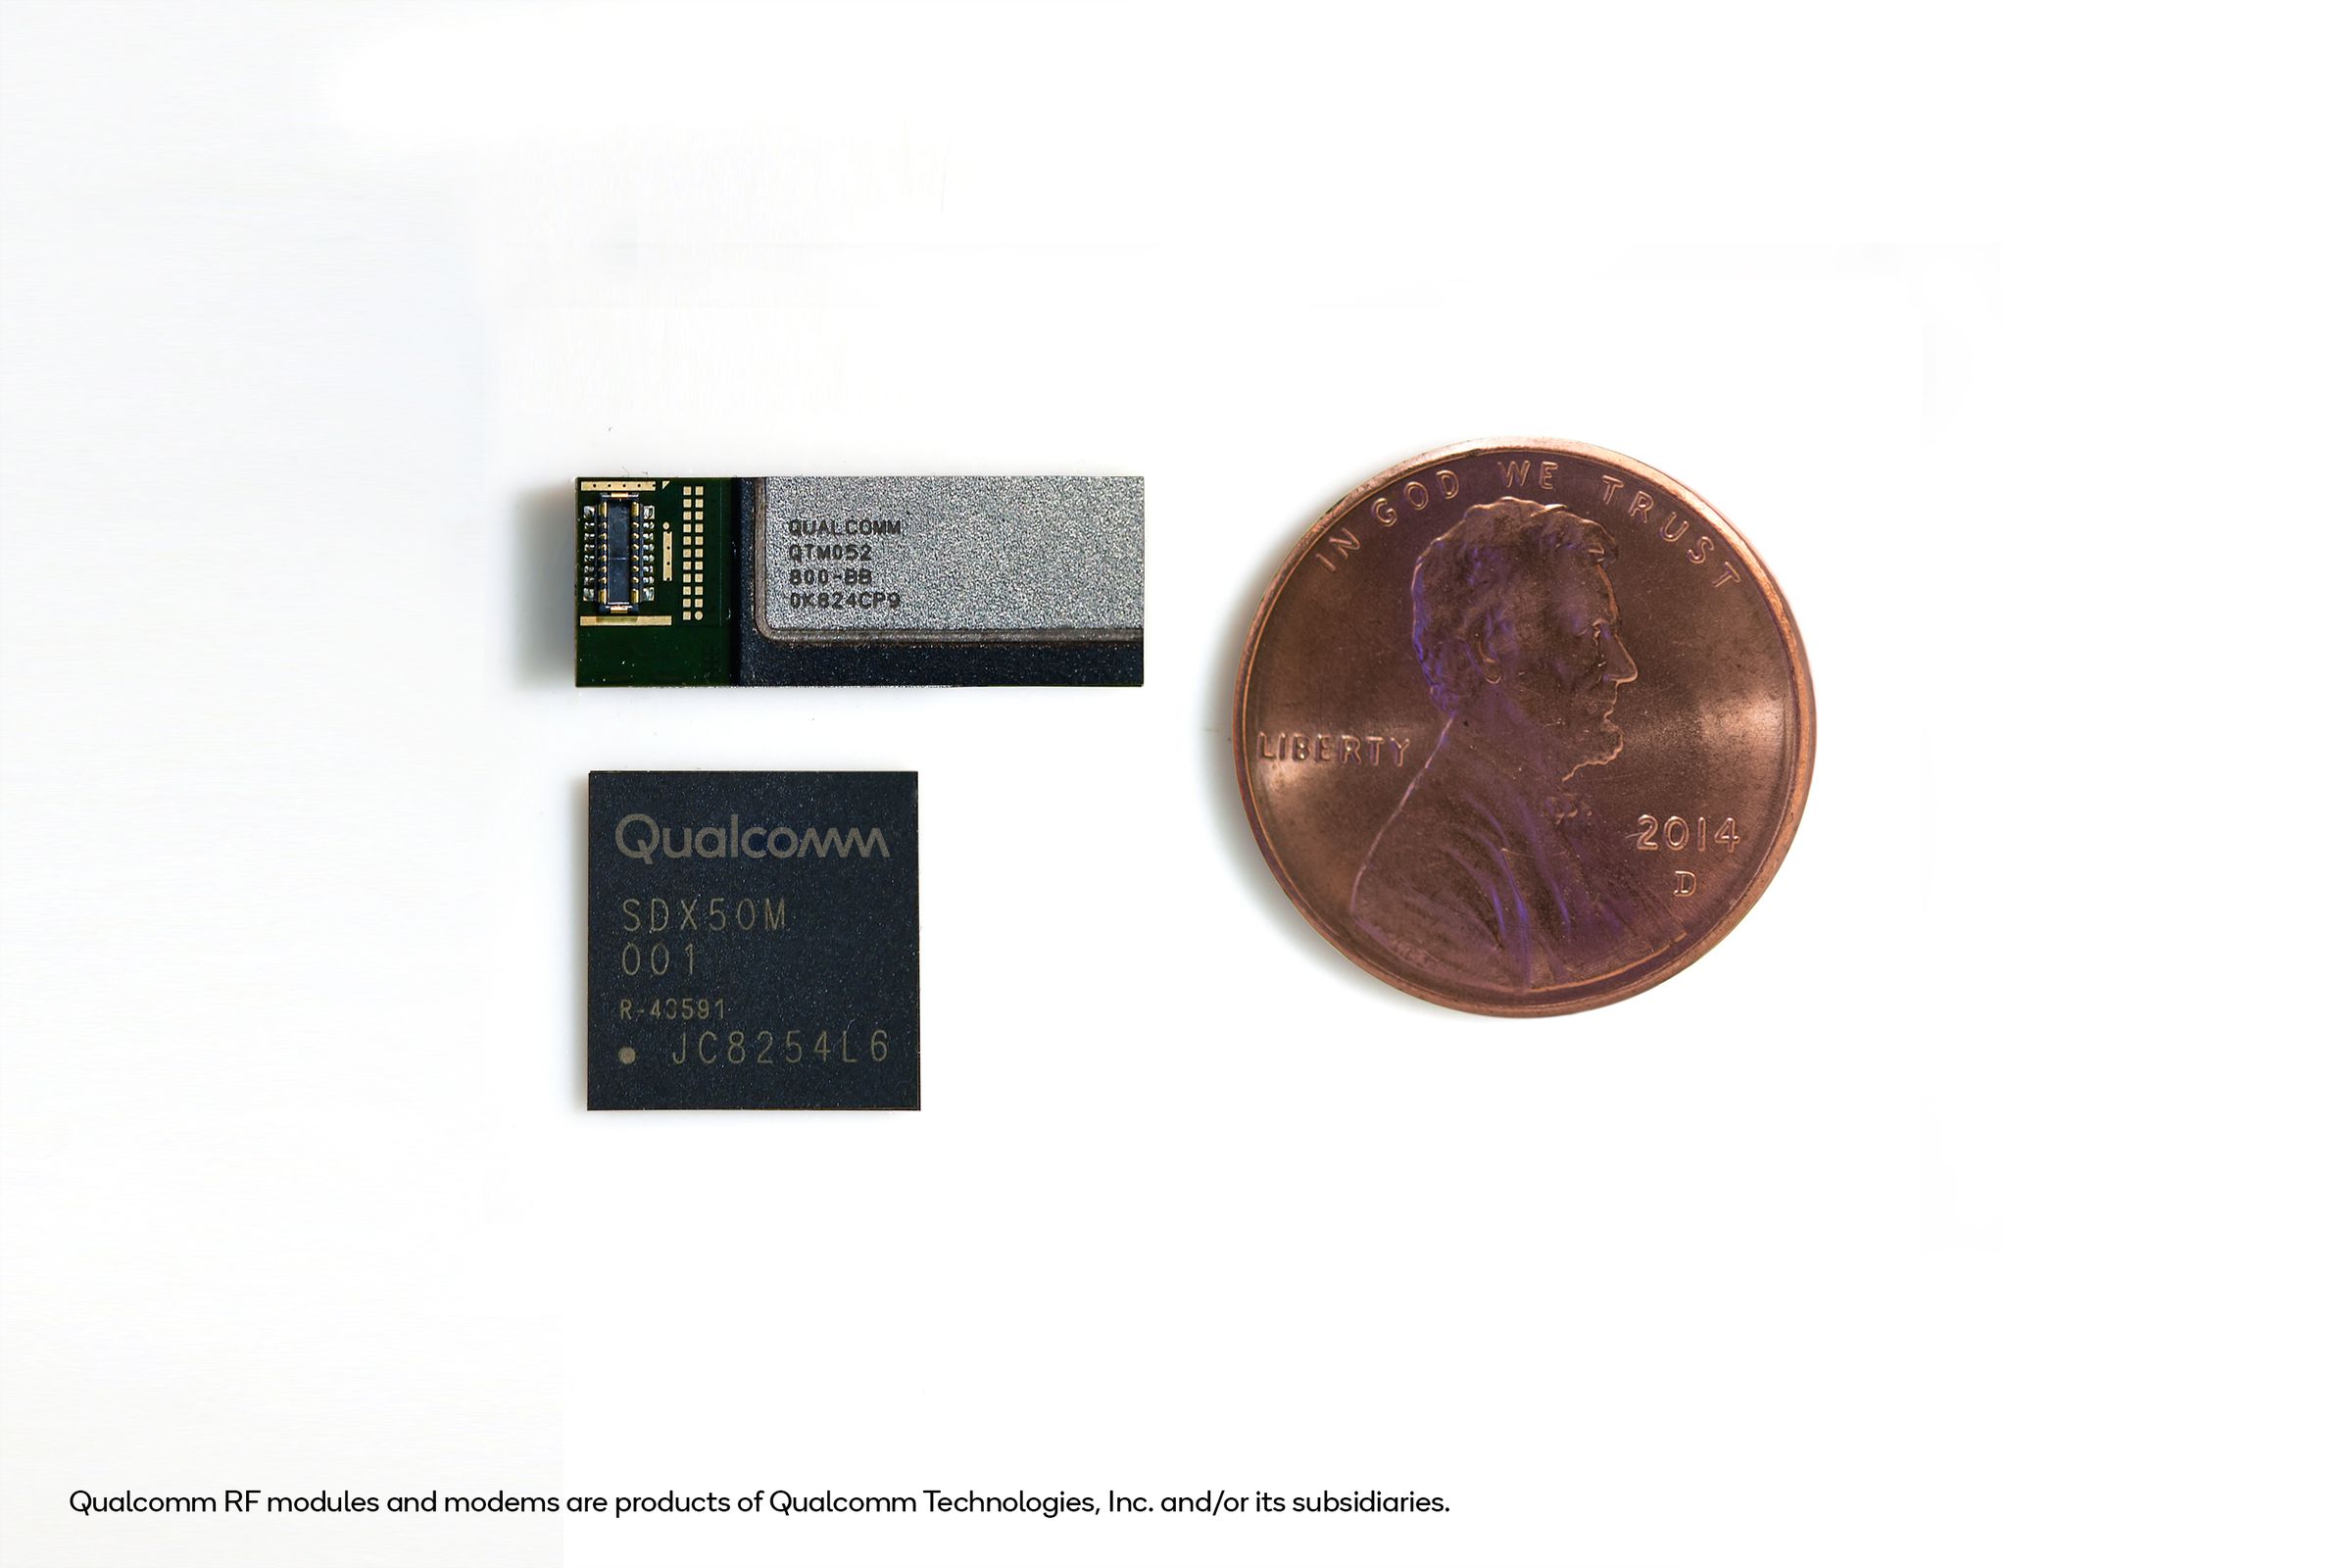 The new antenna module, pictured with Qualcomm’s 5G X50 modem (penny for scale)